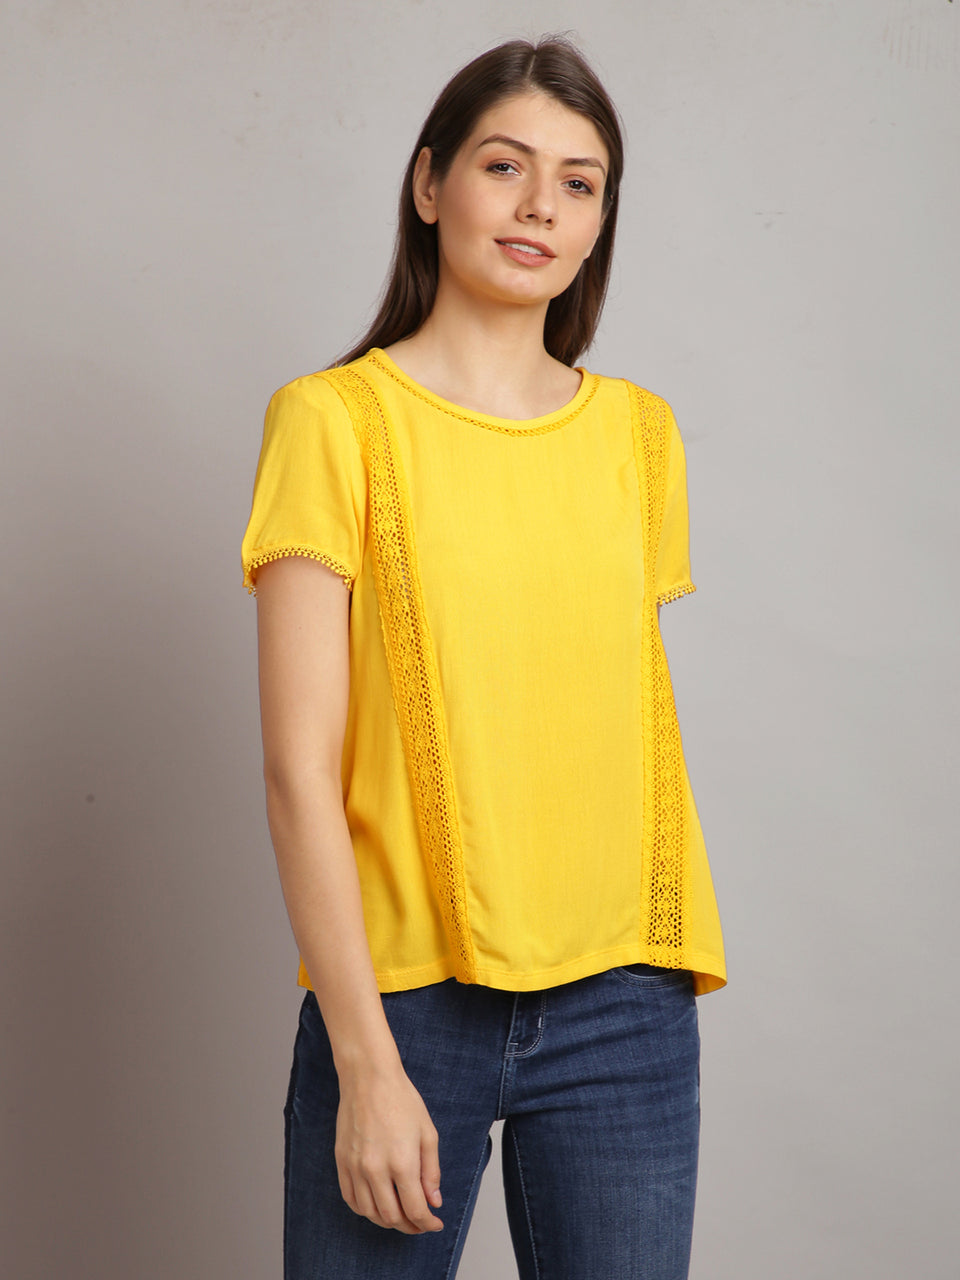 women solid yellow half sleeve lace tops